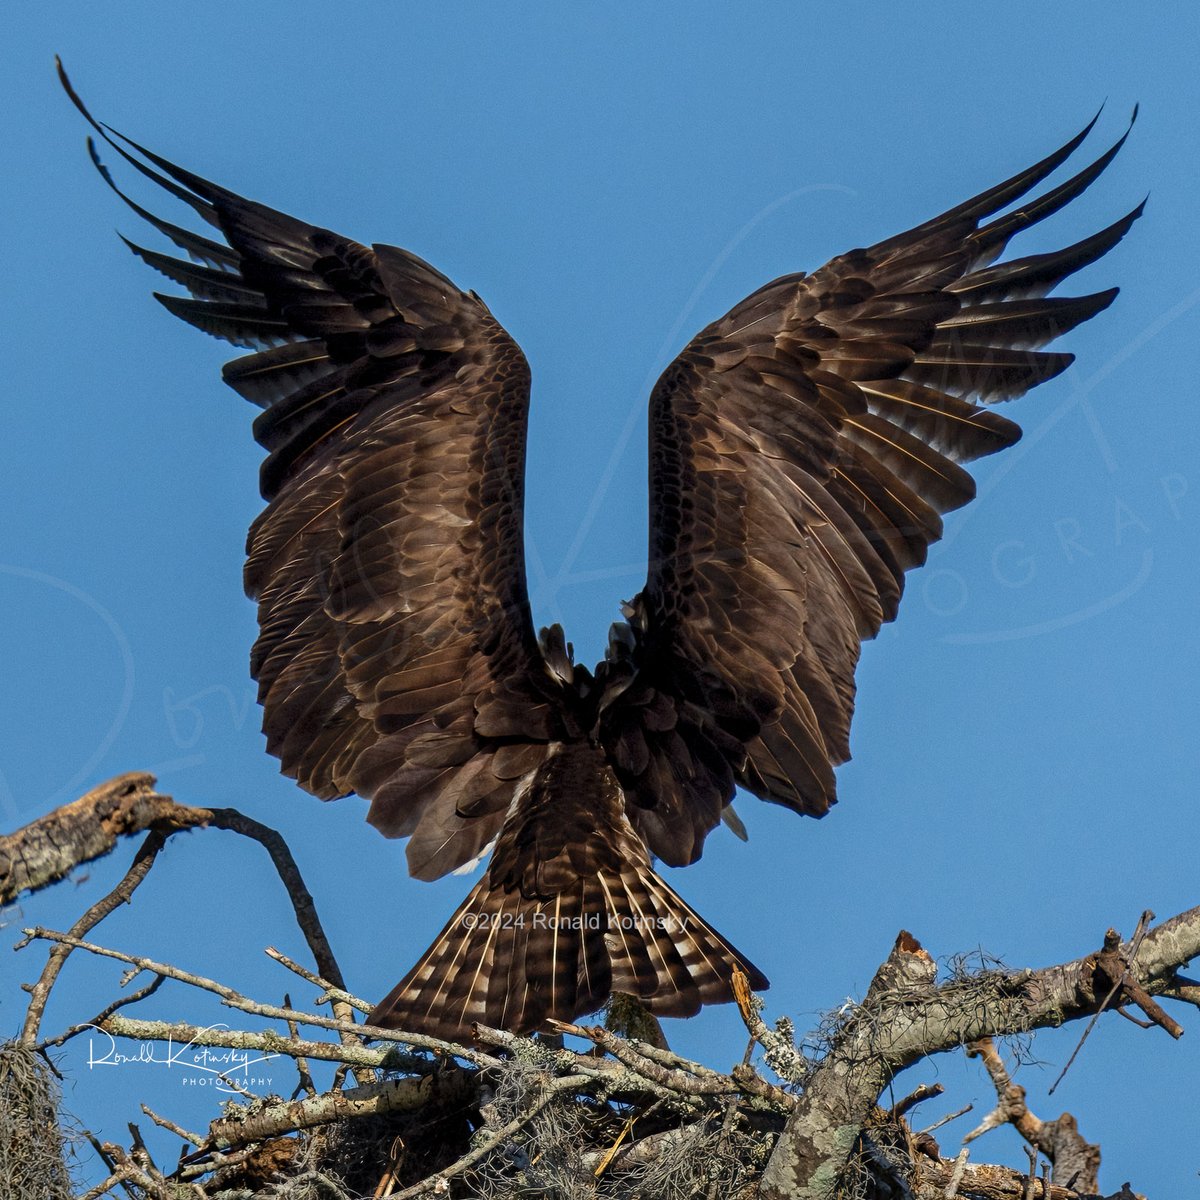 Capturing the essence of the osprey's wings – in search of the perfect subject to paint or license?

@todaysbird
#rkotinsky #ospey #paint #starvingartist #birdsofprey